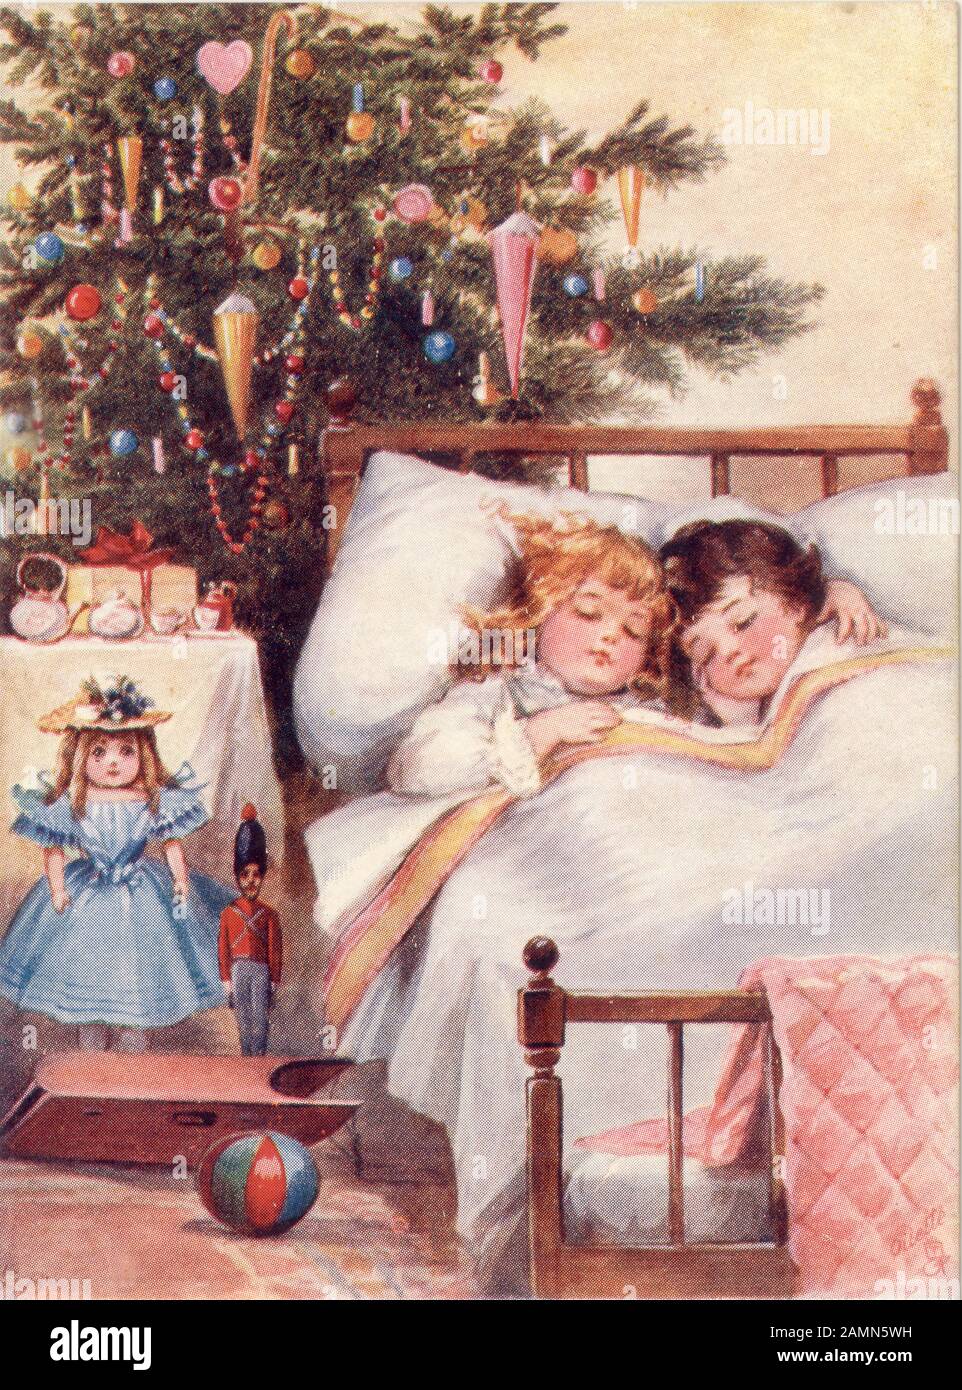 Original cute Christmas traditional greetings postcard of children tucked up in bed on Christmas morning with presents and tree, original oilette, circa 1900's  England, U.K. Stock Photo